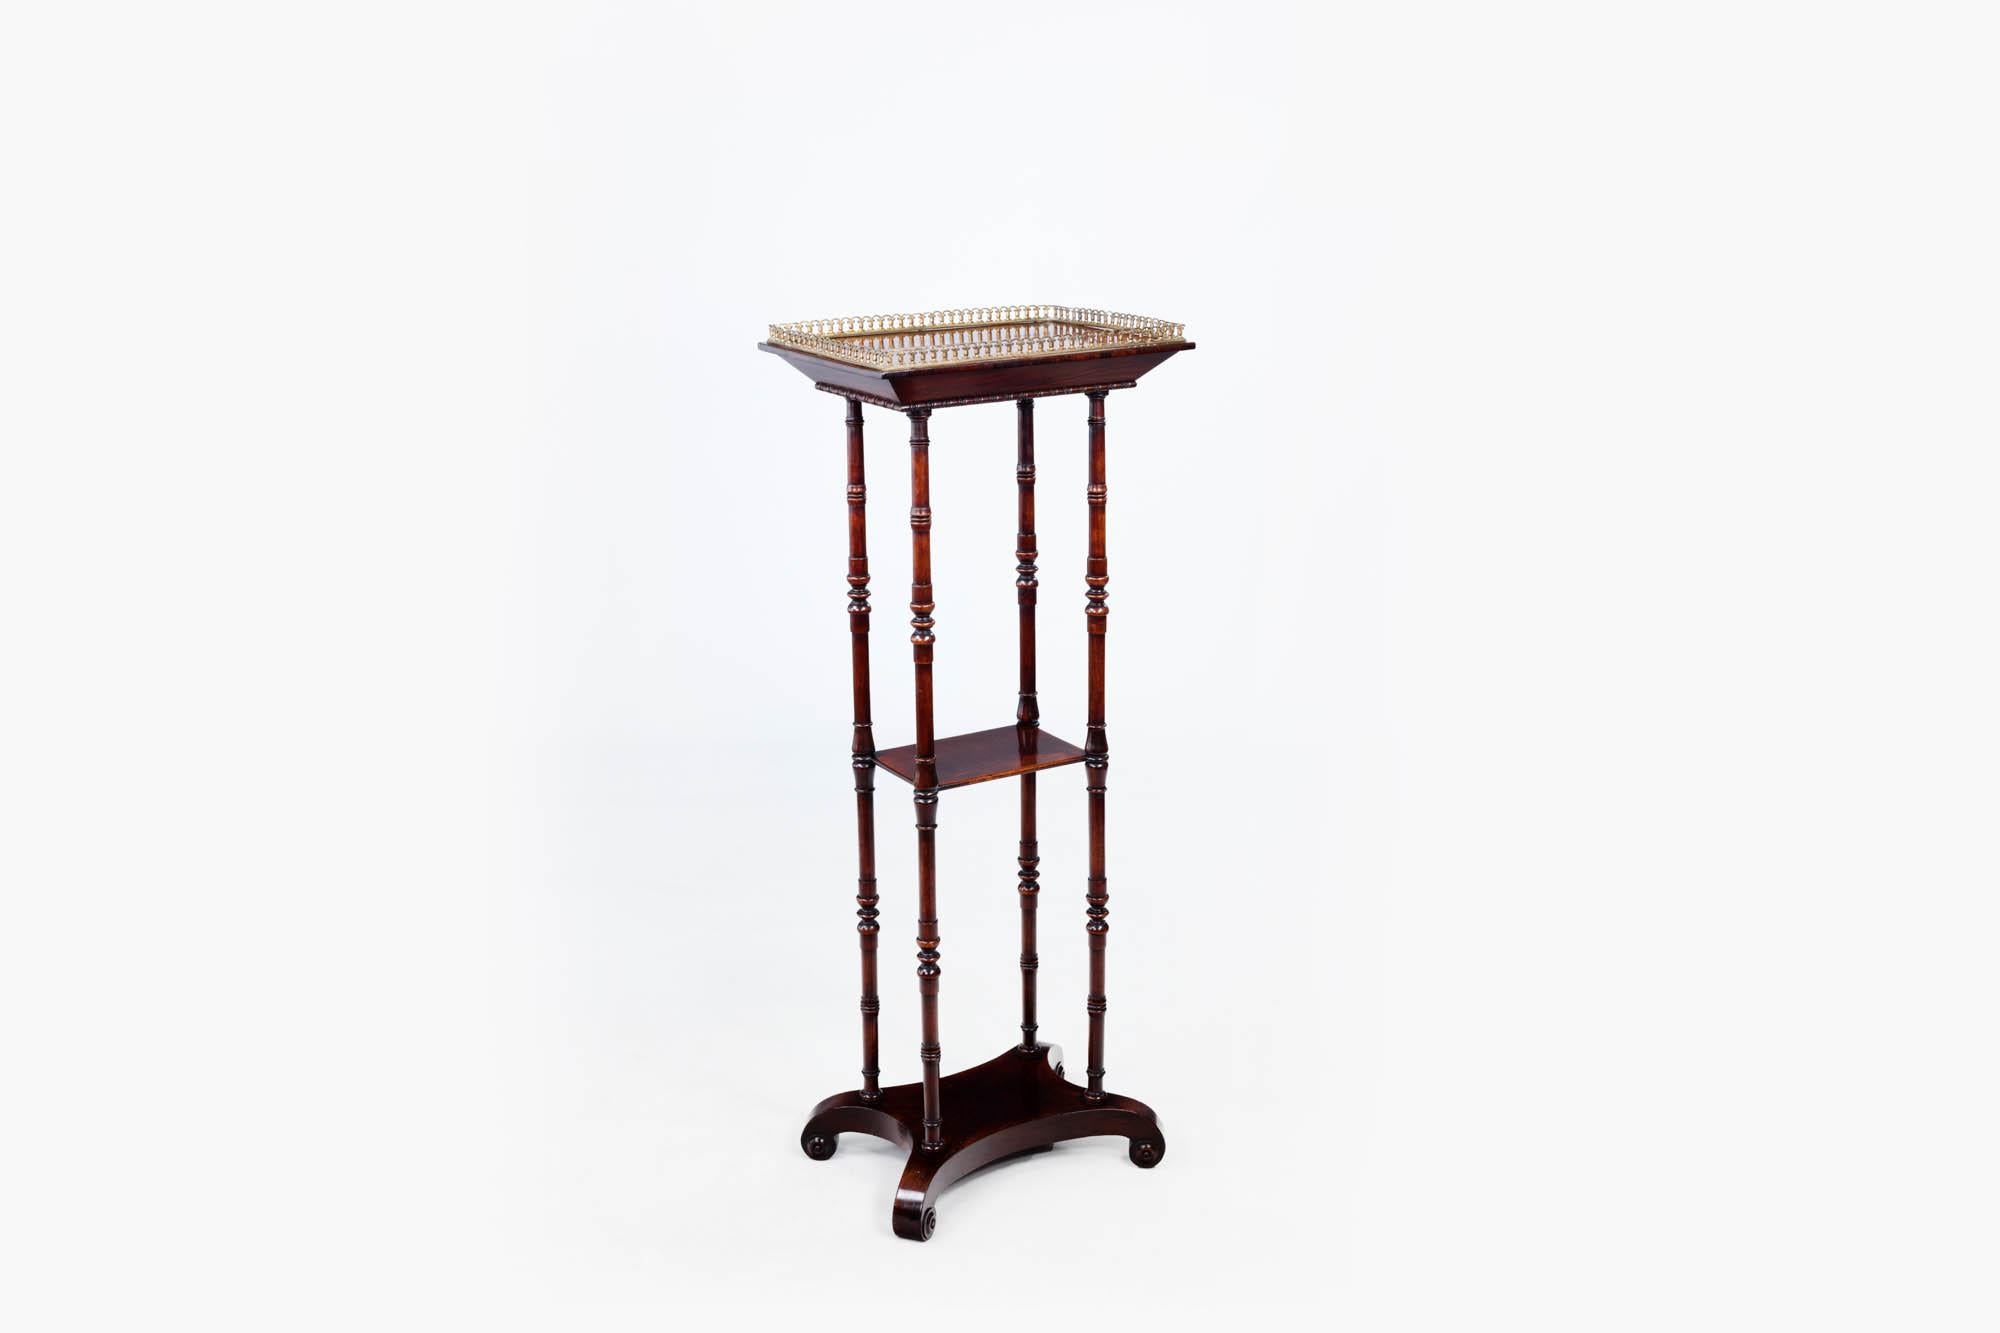 19th century Rosewood three-tier what-not. The top shelf is surmounted with a brass gallery rail and carved cockbead detail to the edges. The whole piece stands supported by four finely carved bolstered pillars. The piece terminates on scrolled feet.